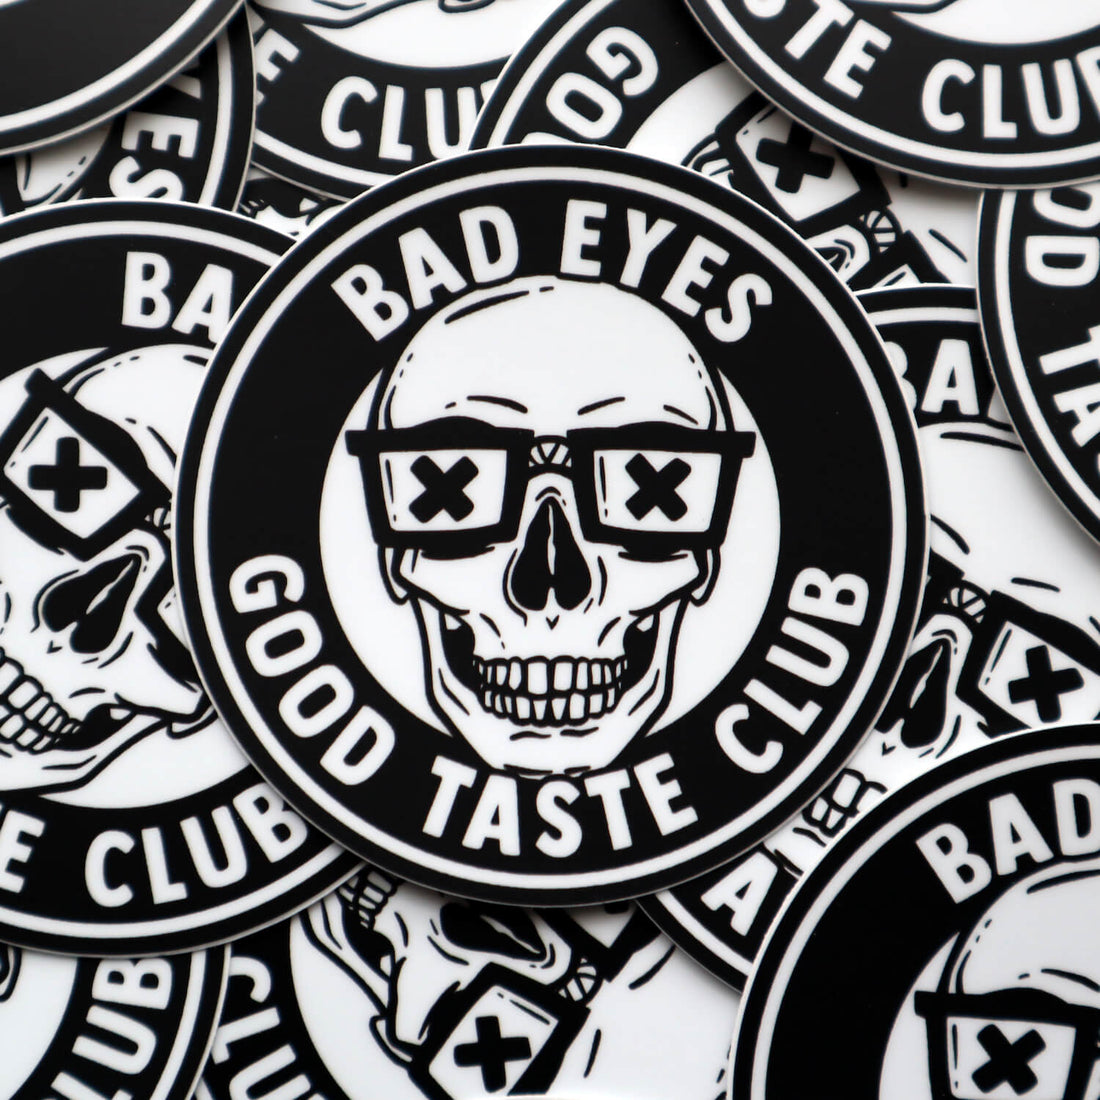 A collection of vinyl stickers featuring a grinning skull wearing nerd glasses and the words Bad Eyes, Good Taste Club.